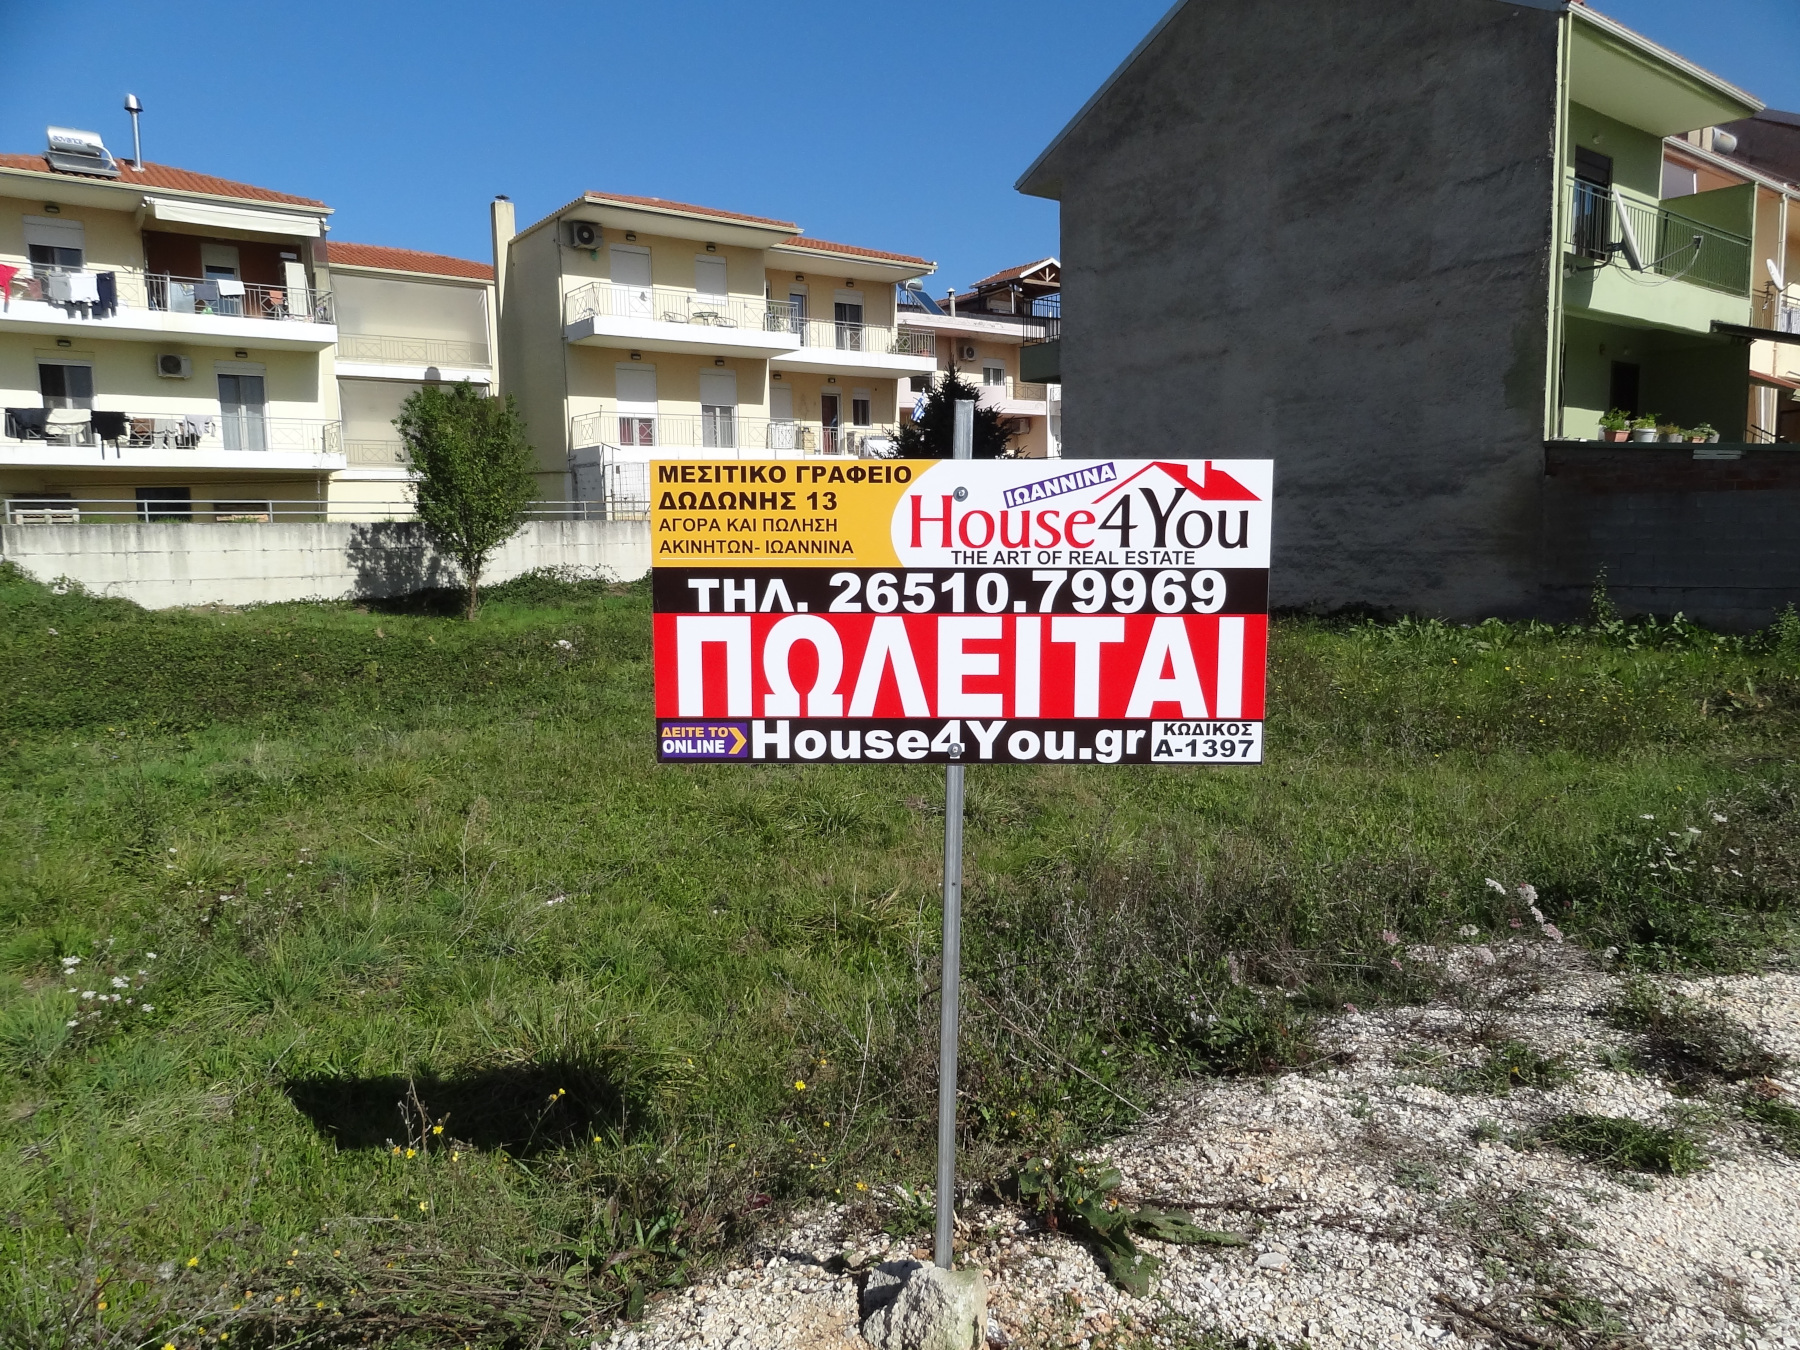 Plot for sale 607 sq.m. and with S.D. 0.6 in Kato Neochoropoulo of Ioannina on Manto Mavrogennos Street